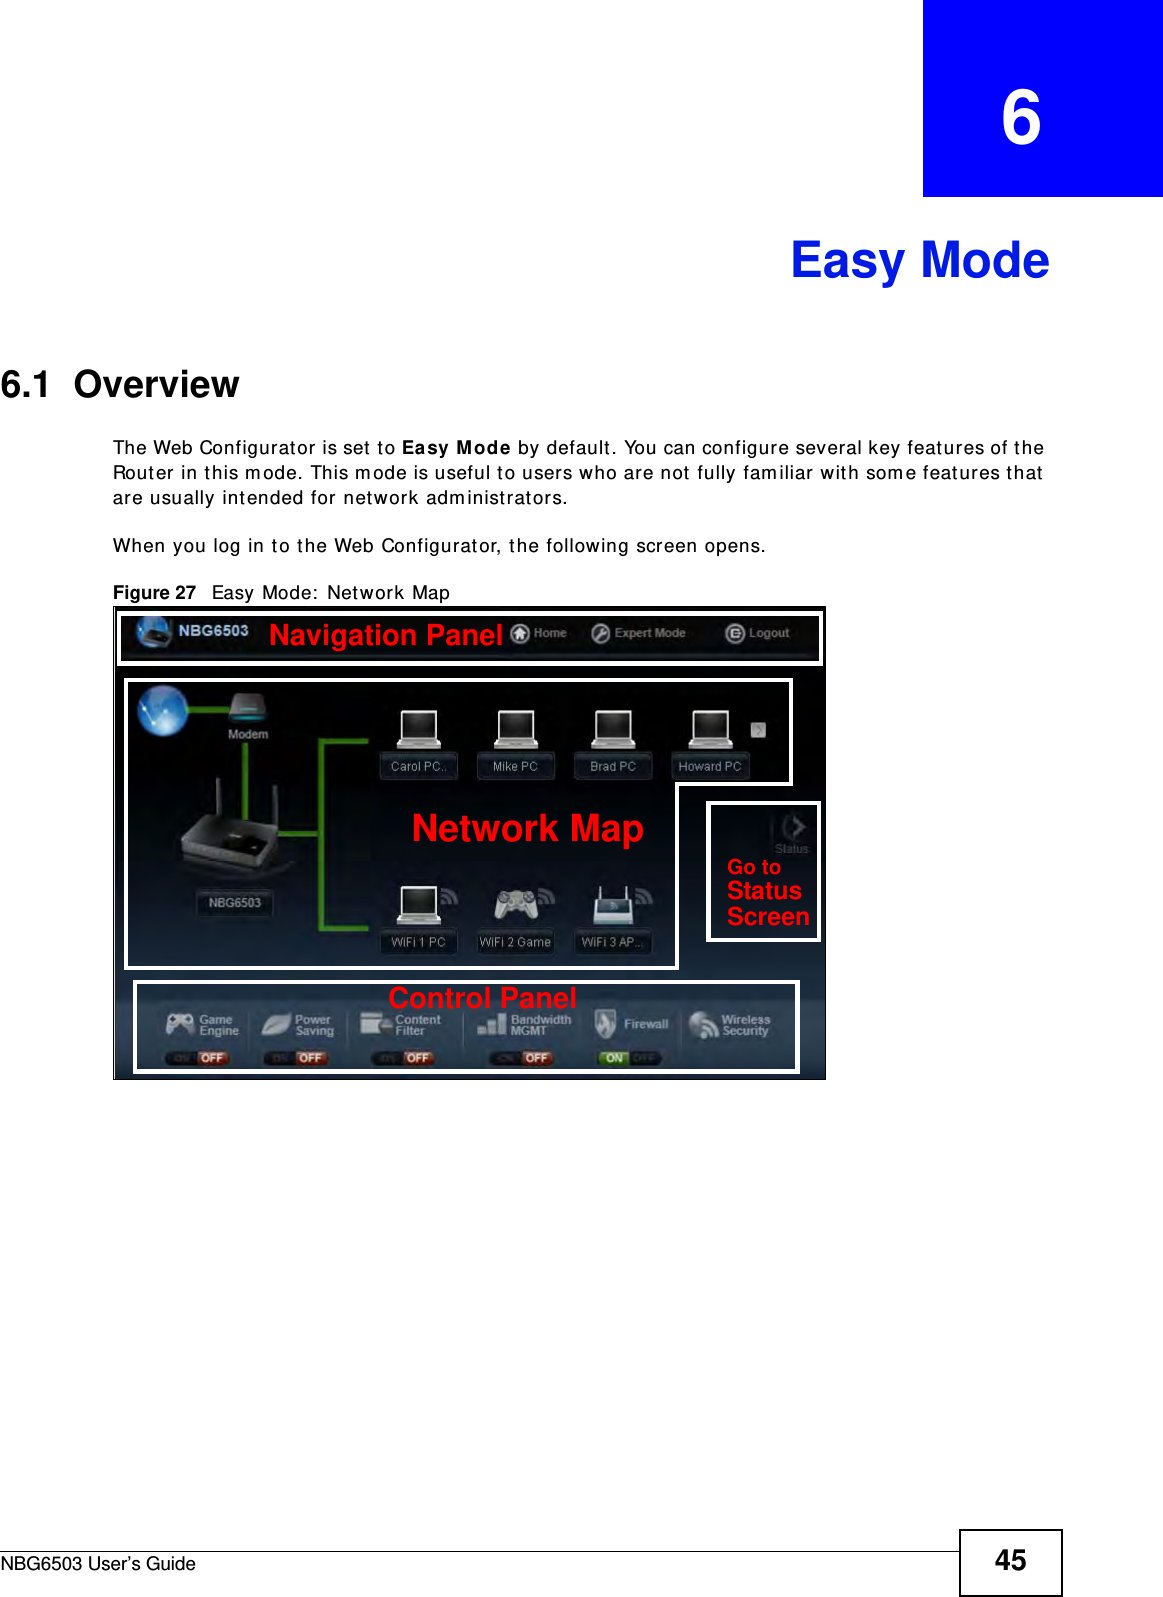 NBG6503 User’s Guide 45CHAPTER   6Easy Mode6.1  OverviewThe Web Configurator is set to Easy Mode by default. You can configure several key features of the Router in this mode. This mode is useful to users who are not fully familiar with some features that are usually intended for network administrators.When you log in to the Web Configurator, the following screen opens.Figure 27   Easy Mode: Network Map Network MapControl PanelGo toStatusScreenNavigation Panel